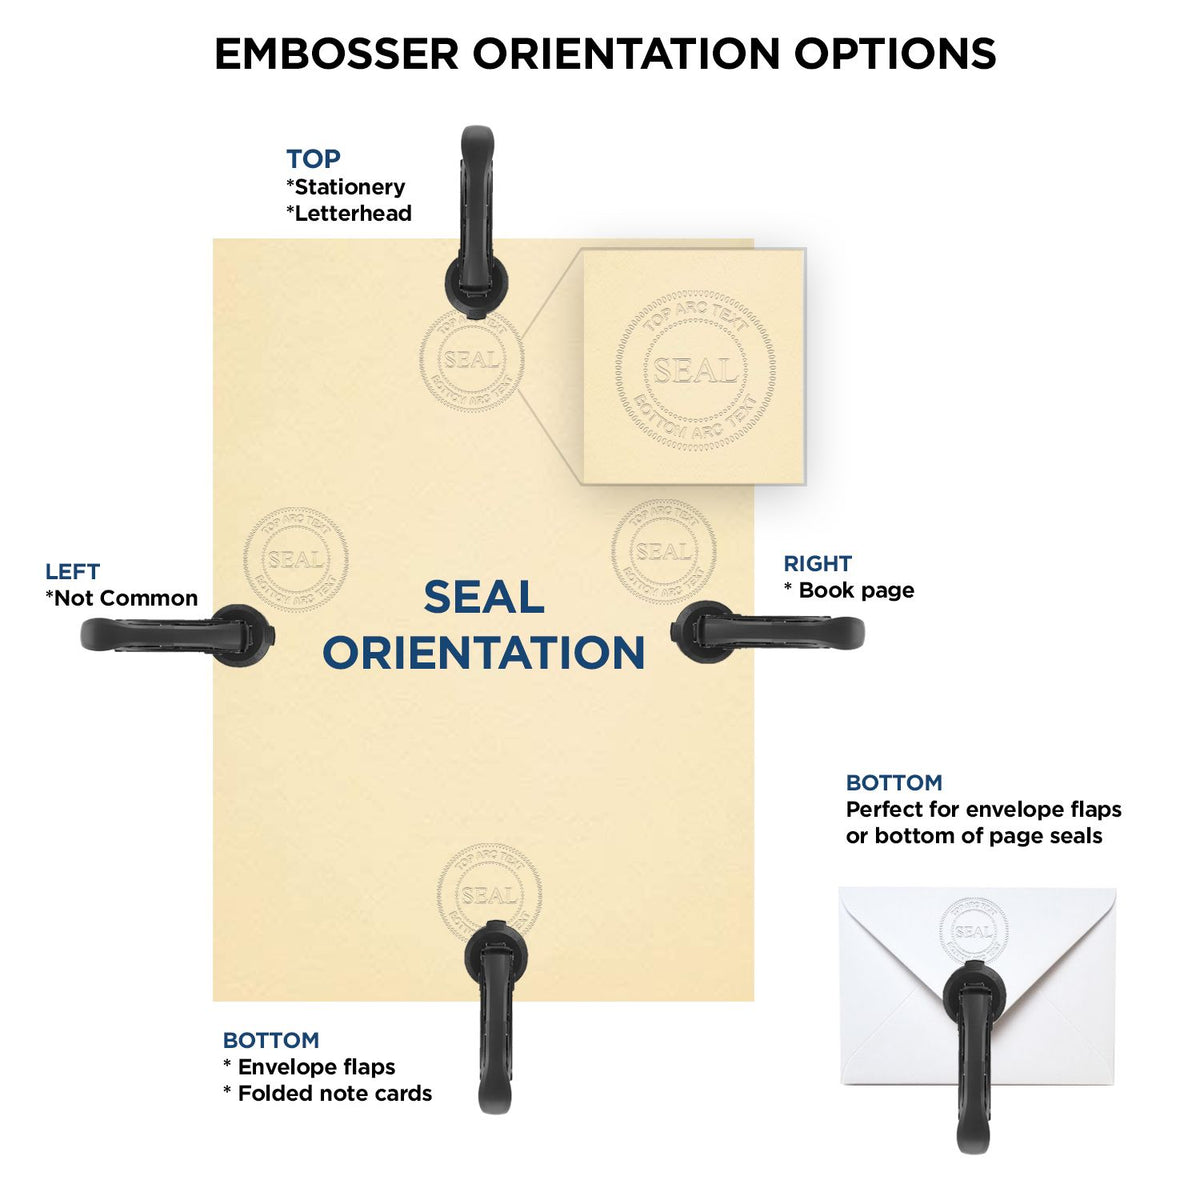 An infographic for the Maryland Desk Surveyor Seal Embosser showing embosser orientation, this is showing examples of a top, bottom, right and left insert.